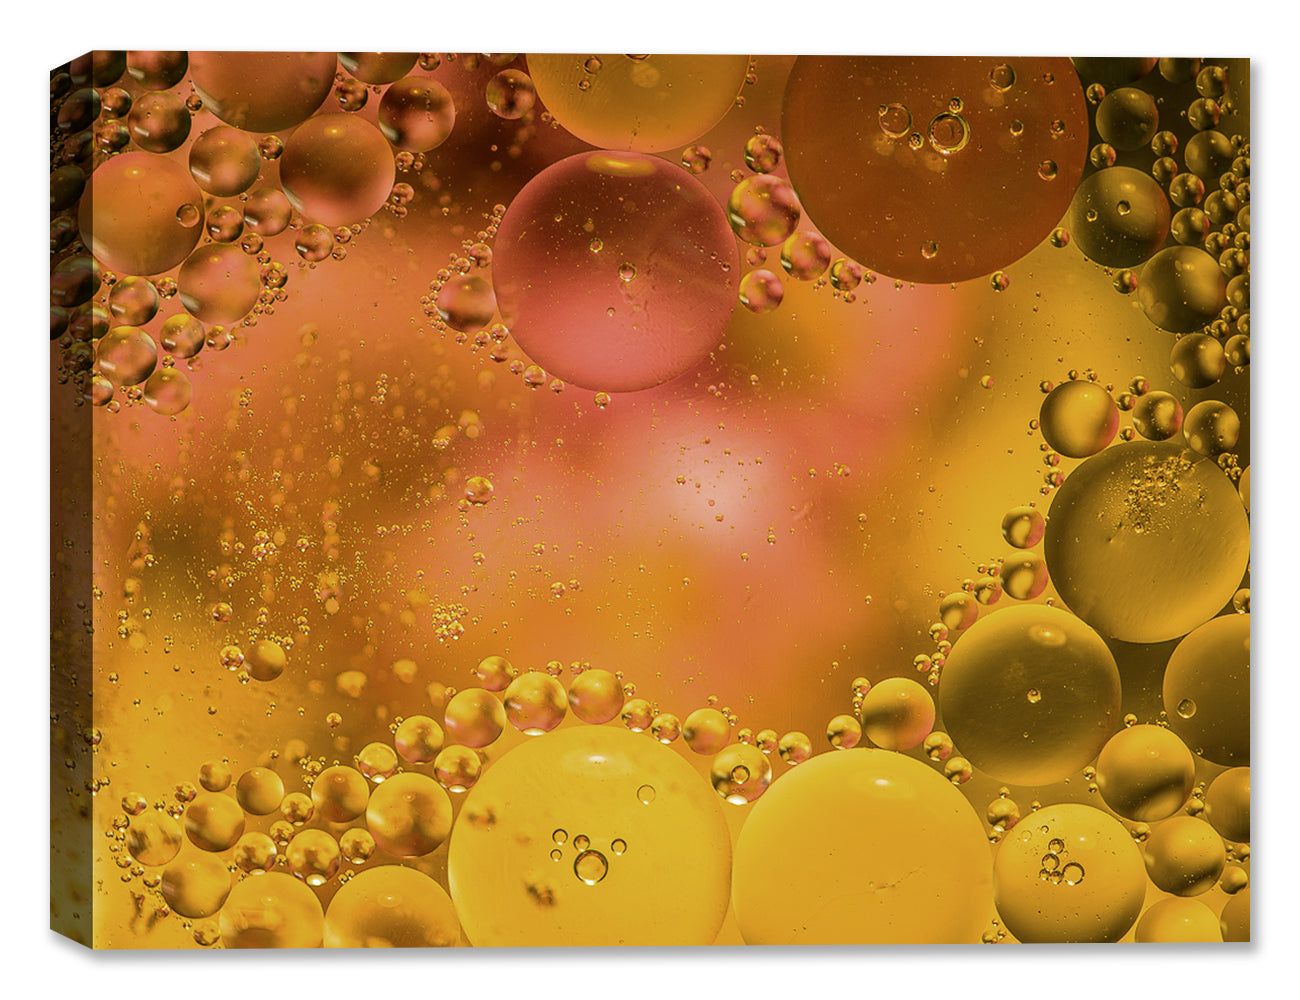 Bubbles No. 16 - Latex on Canvas - Abstract Art